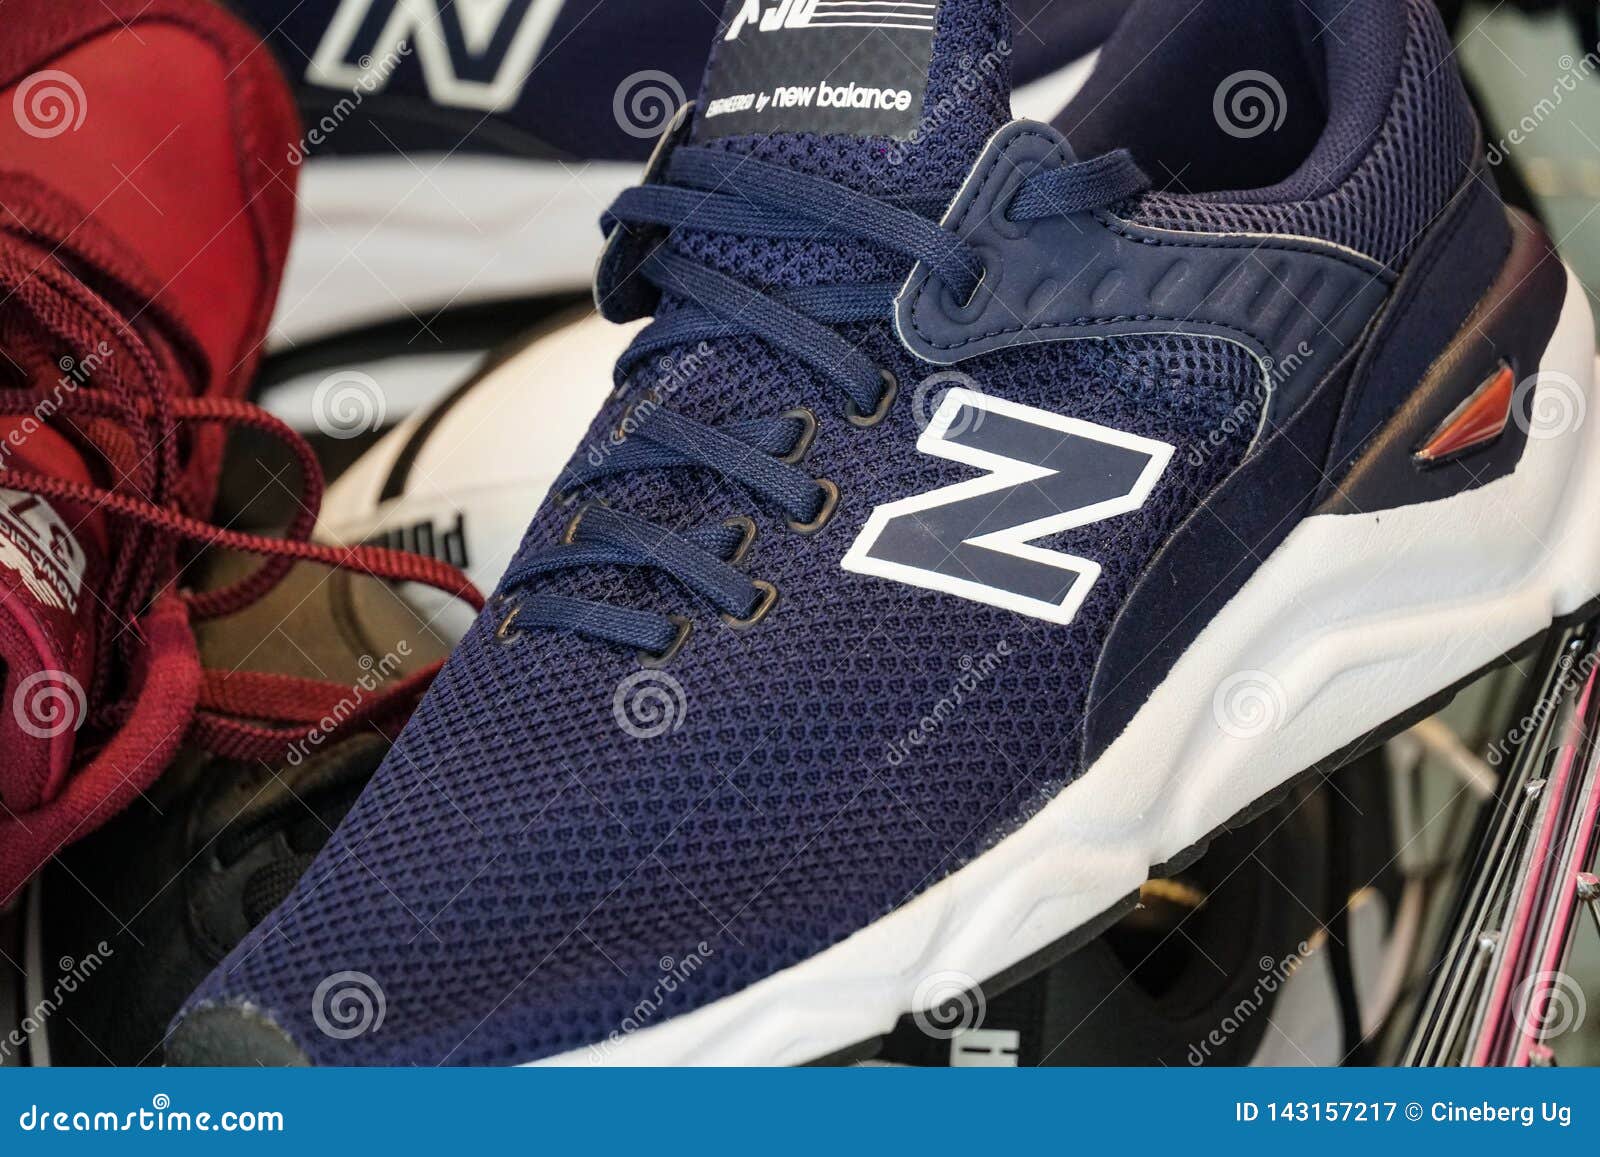 New Balance shoes editorial photography 